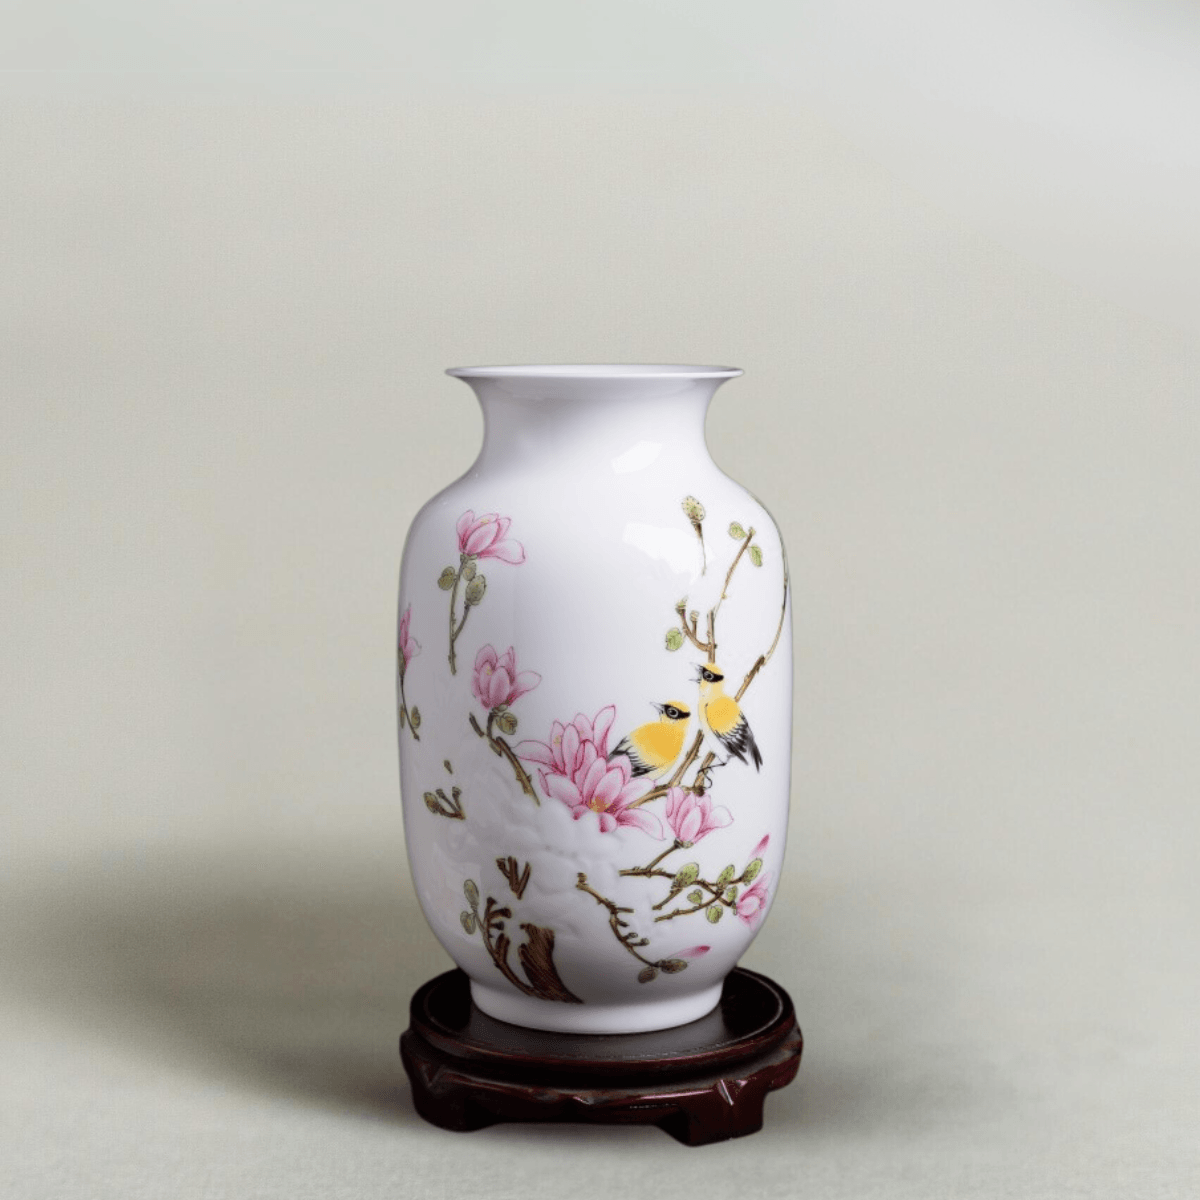 Whispering Blossoms and Songbirds Vase - Raf LifeStyle